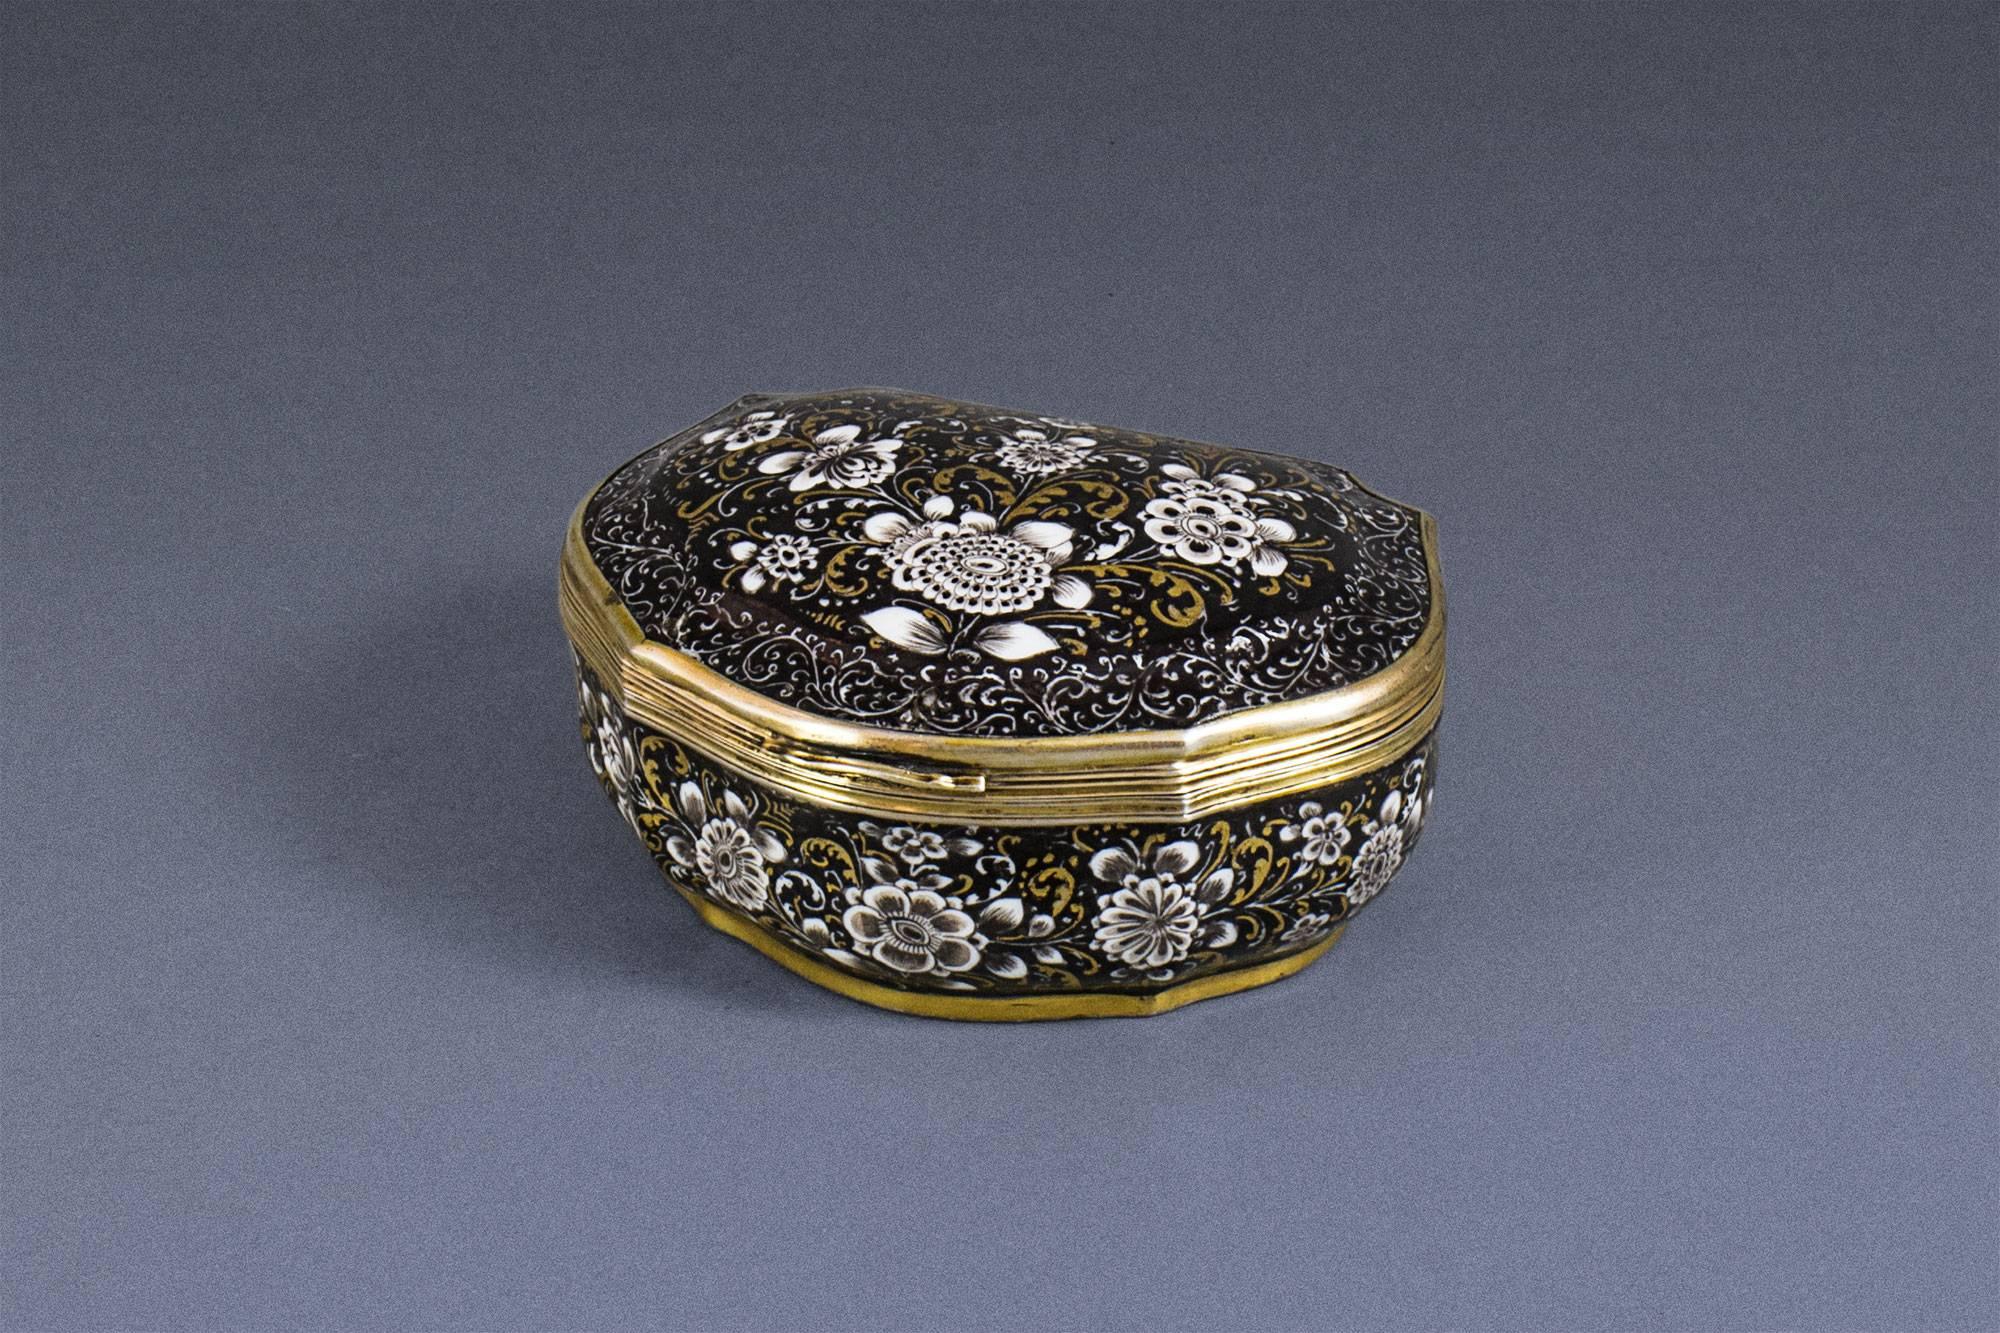 Meissen, circa 1740
Form number ‘66’ (after Beaucamp-Markowsky)
Silver-gilt mount
The interior of the box completely gilded

The exterior sides of the box are decorated with black ground colour, covered with etched flowers and branches in white